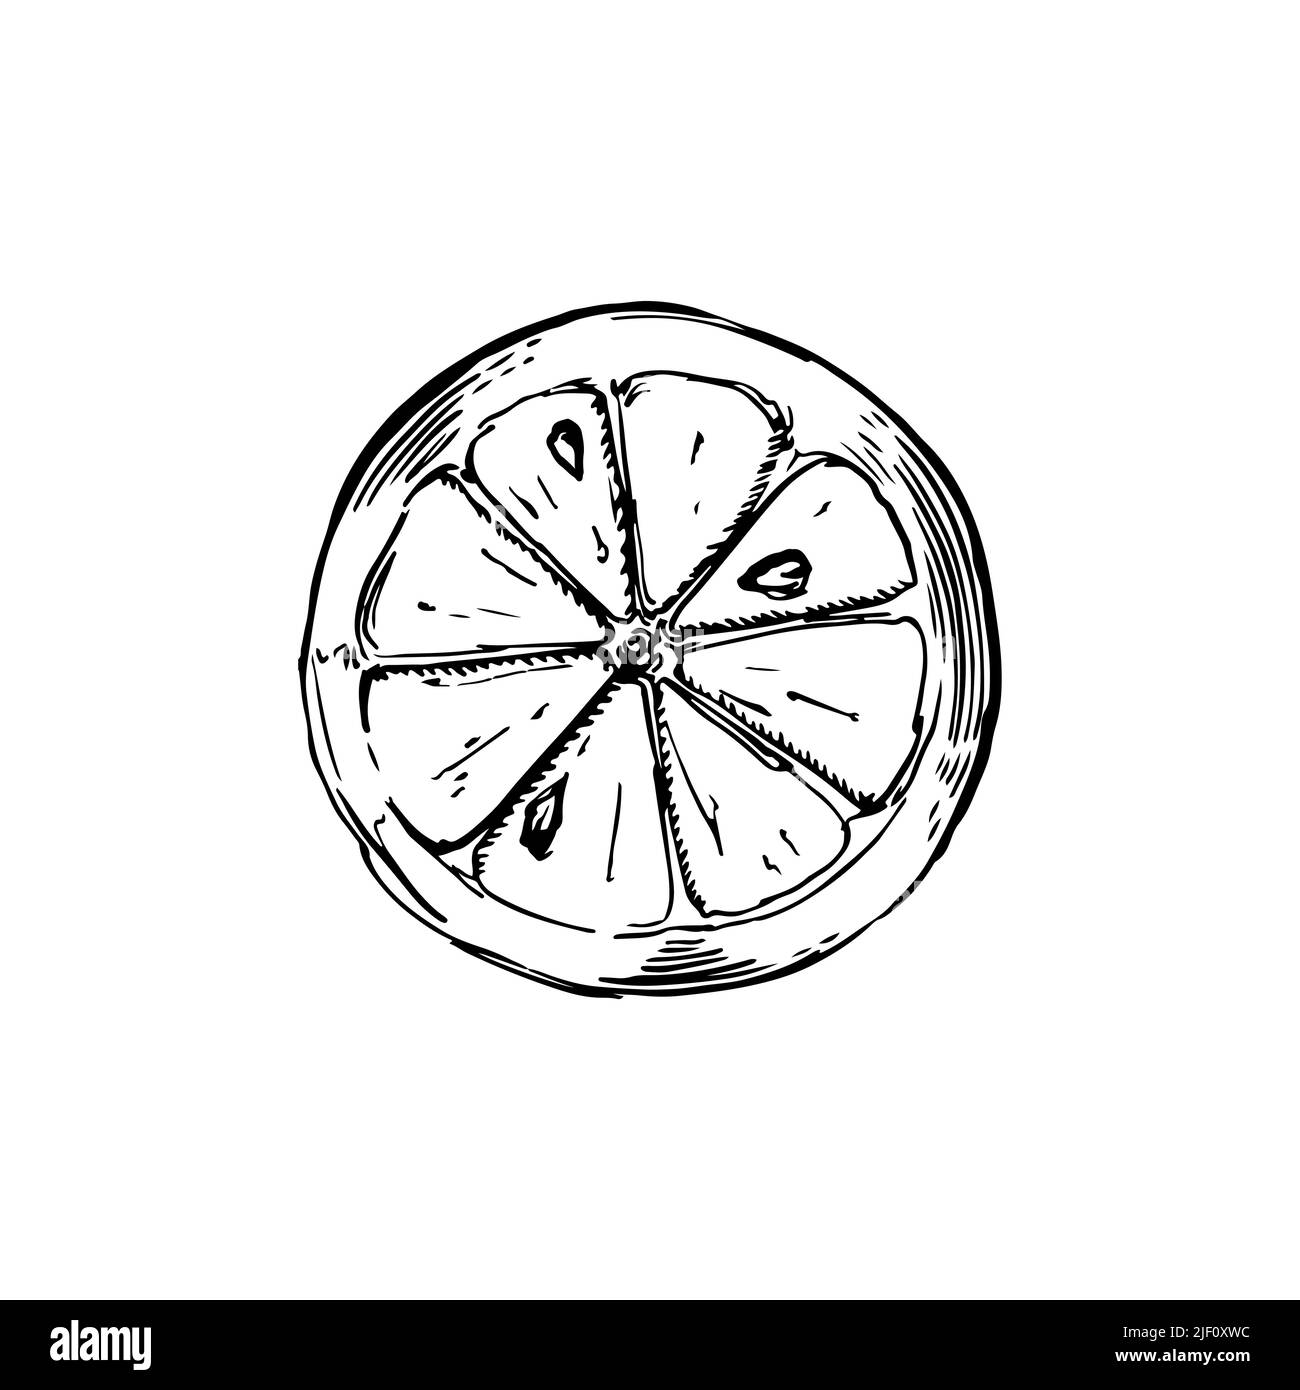 Sliced piece of lemon sketch in classic engraving style isolated on white Stock Vector